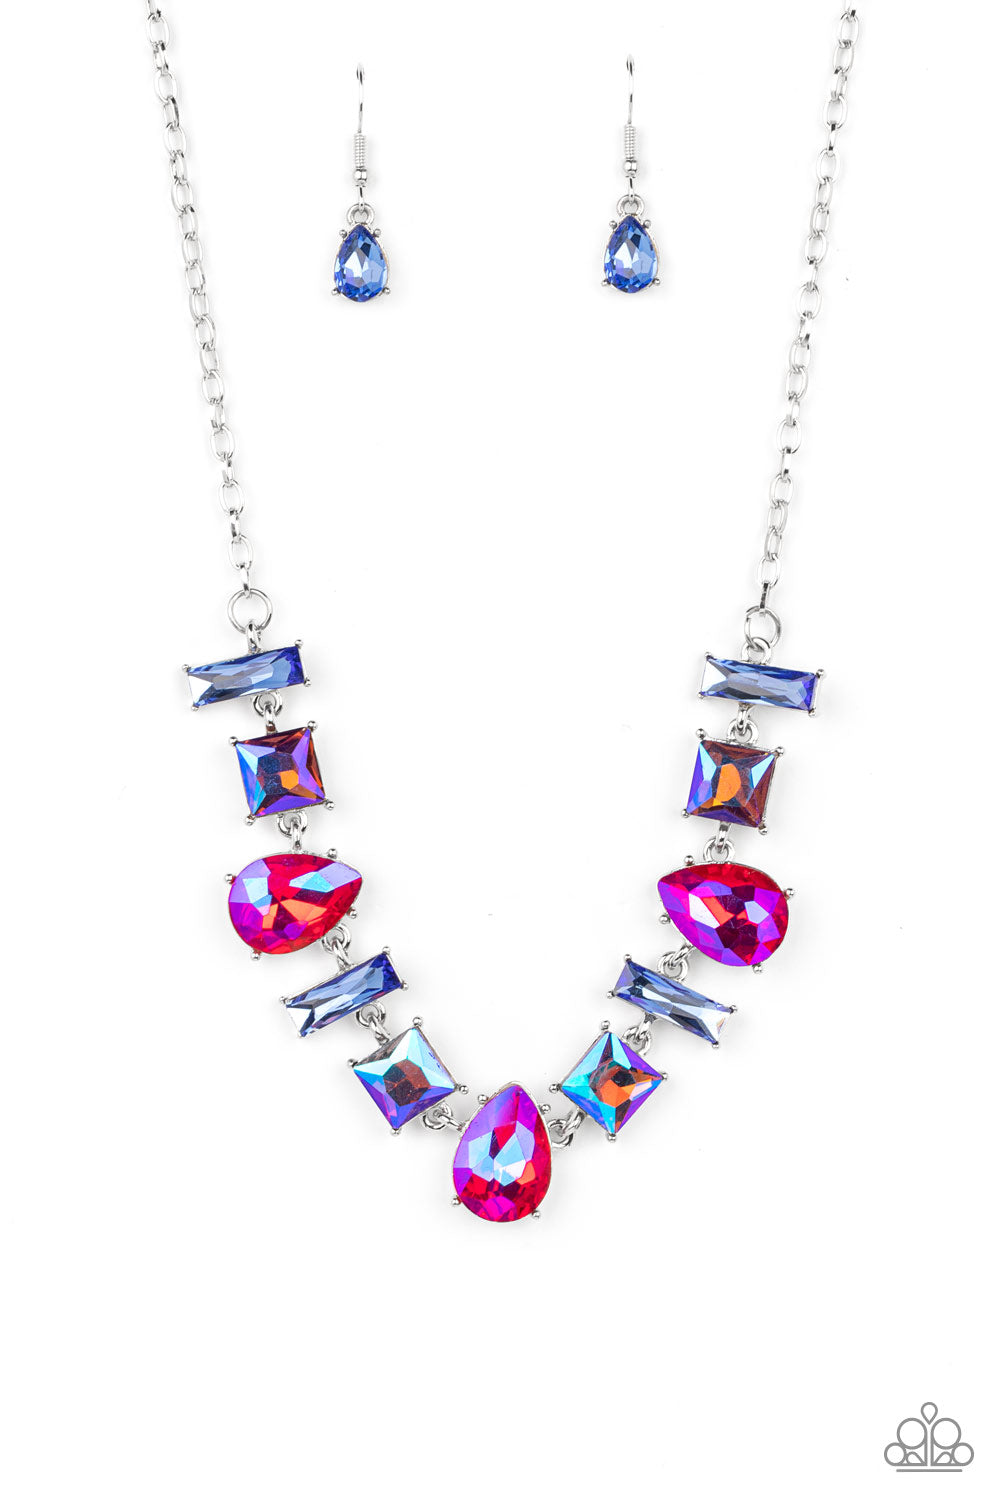 Interstellar Ice - Pink and Blue - Iridescent - Oil Spill Necklace - Paparazzi Jewelry - Bejeweled Accessories By Kristie - Featuring glassy, iridescent, and oil spill finishes, a mismatched collection of emerald cut blue, square multicolored, and teardrop pink gems delicately connects below the collar for a stellar statement. Features an adjustable clasp closure.